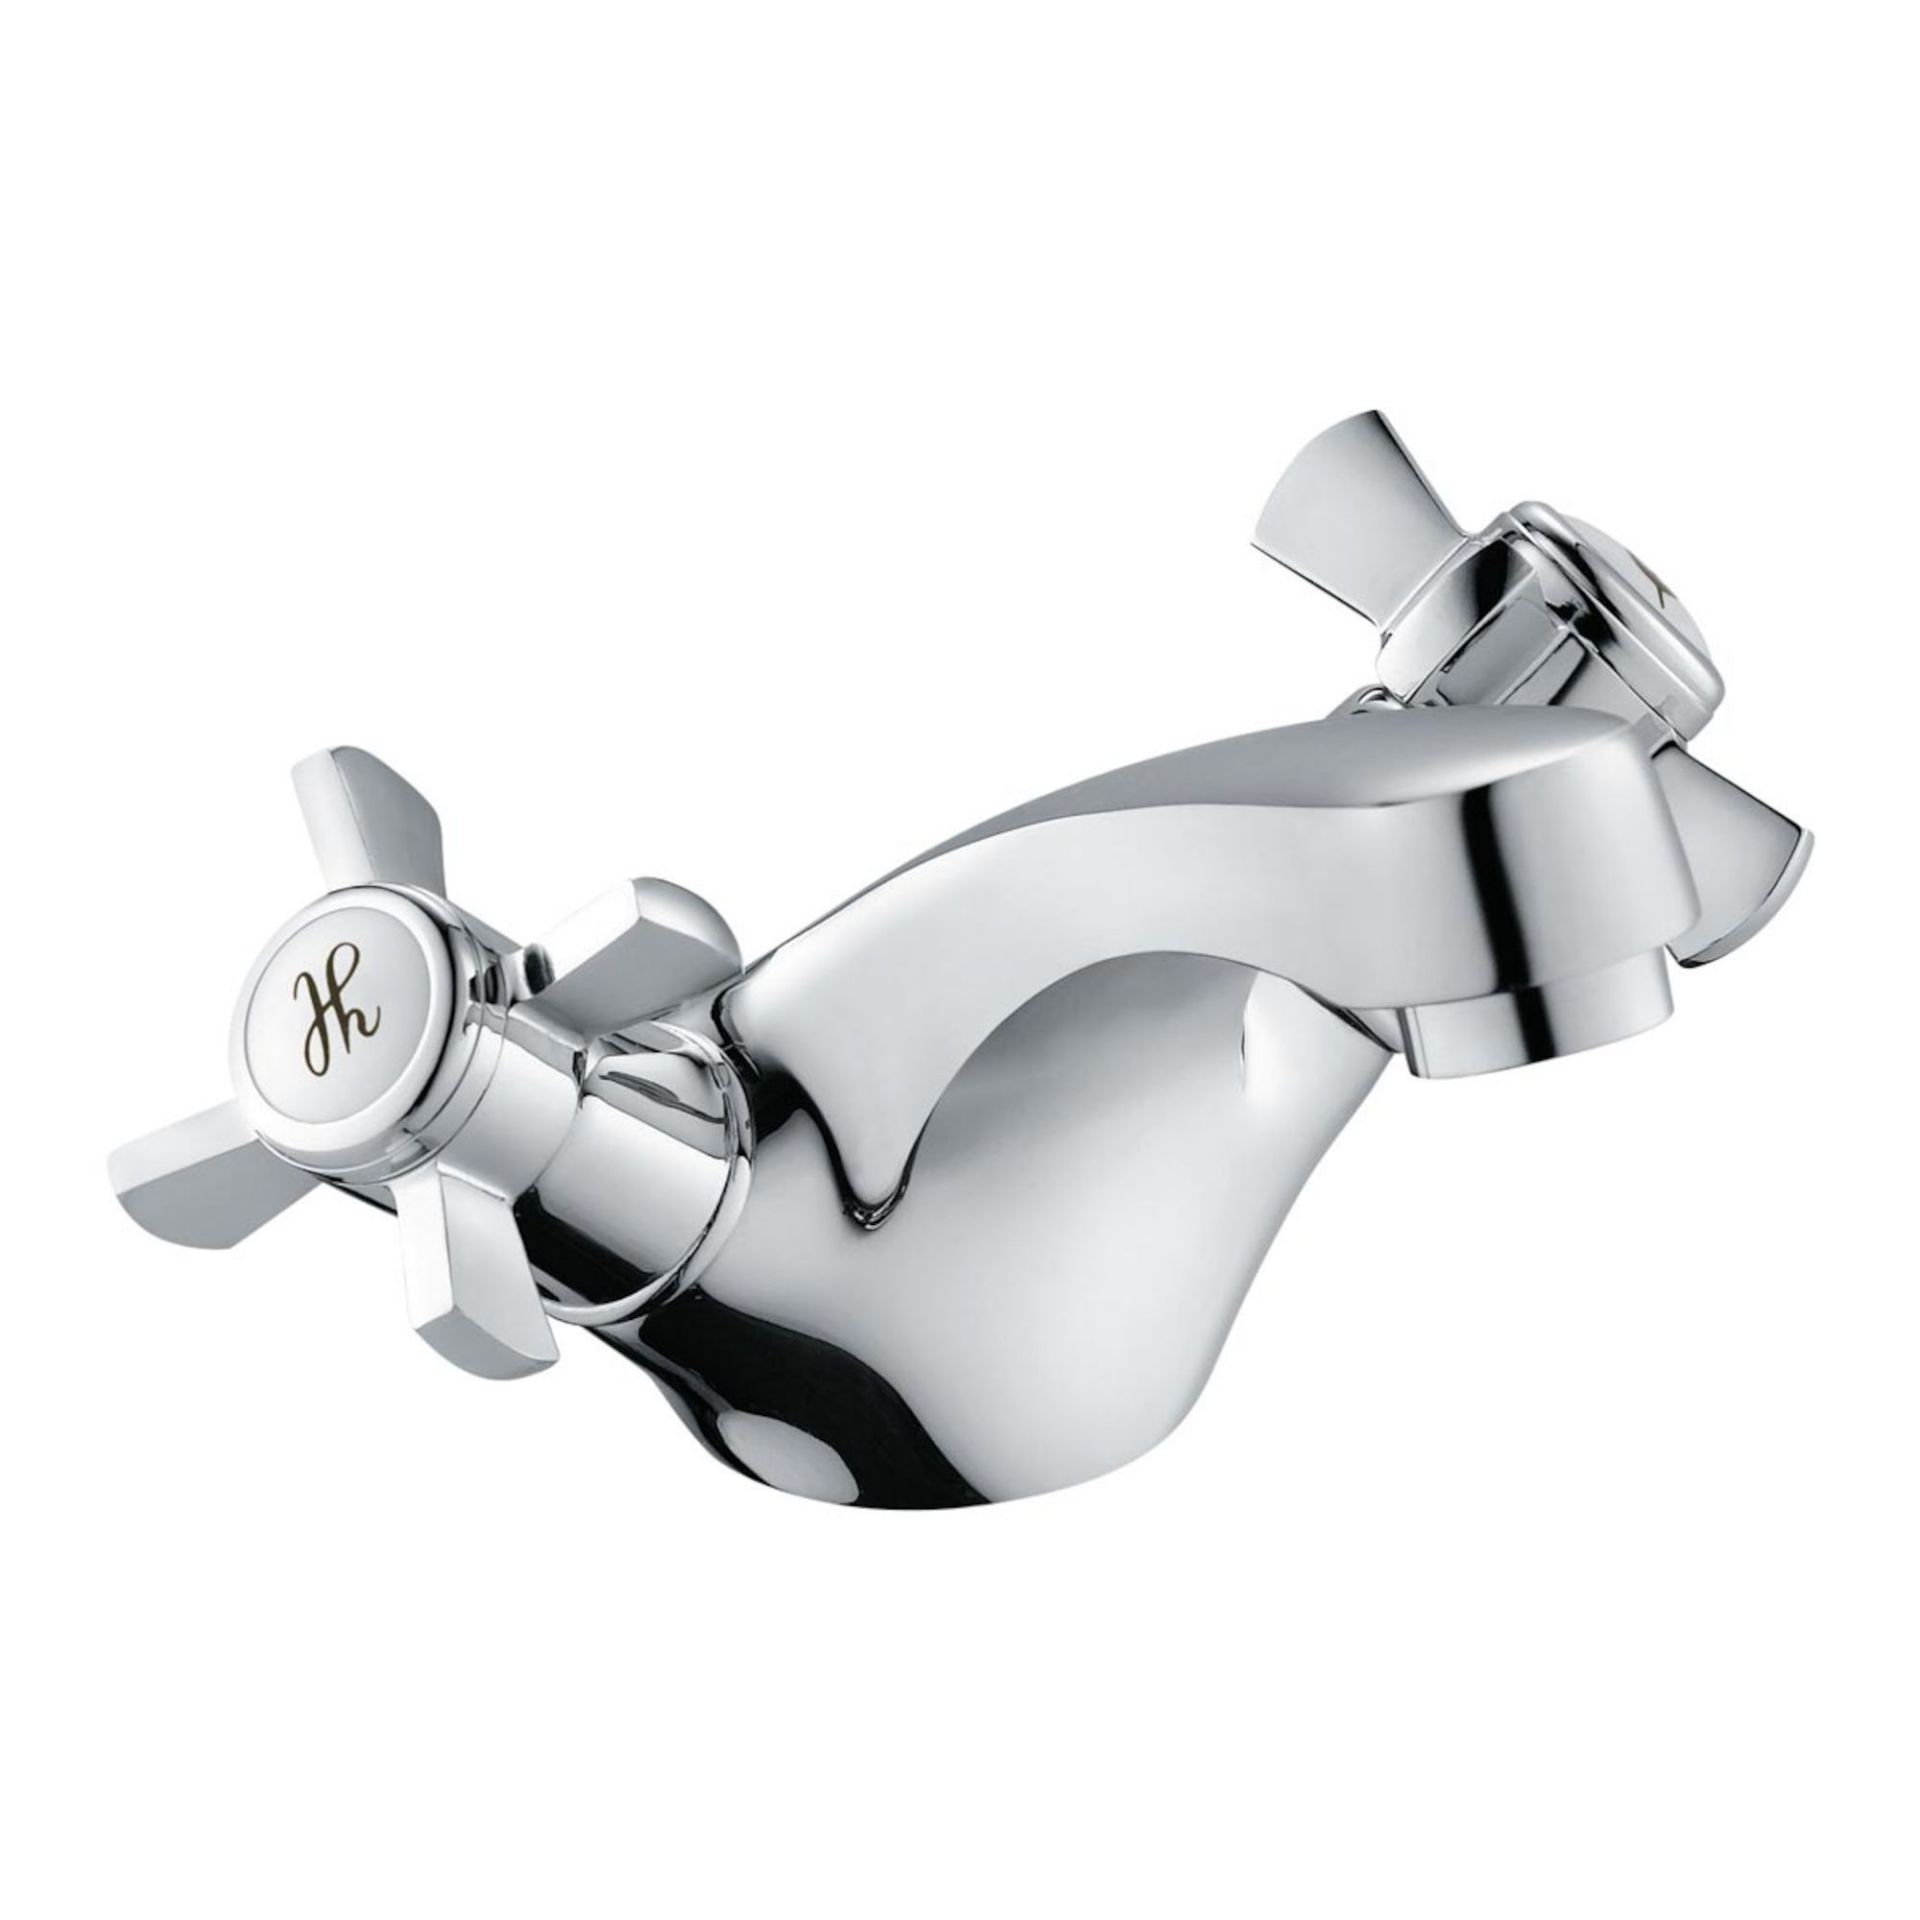 (EW152) Loxley Traditional Basin Mixer Tap Engineered from premium solid brass which is layered in - Image 2 of 7